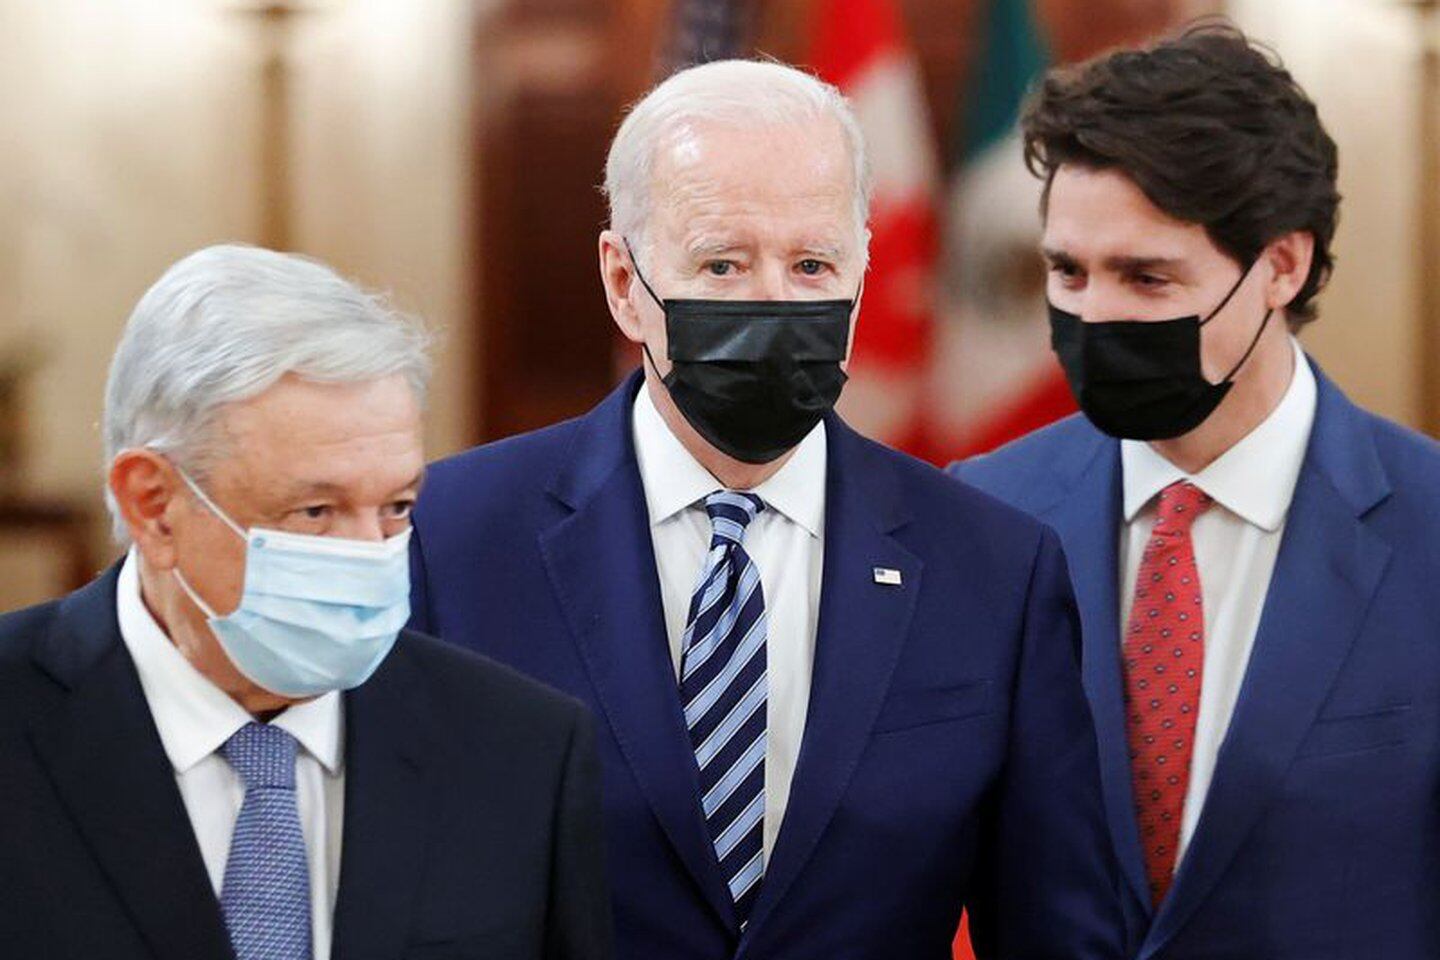 AMLO, Joe Biden and Justin Trudeau planned another meeting in 2022, in Mexico City